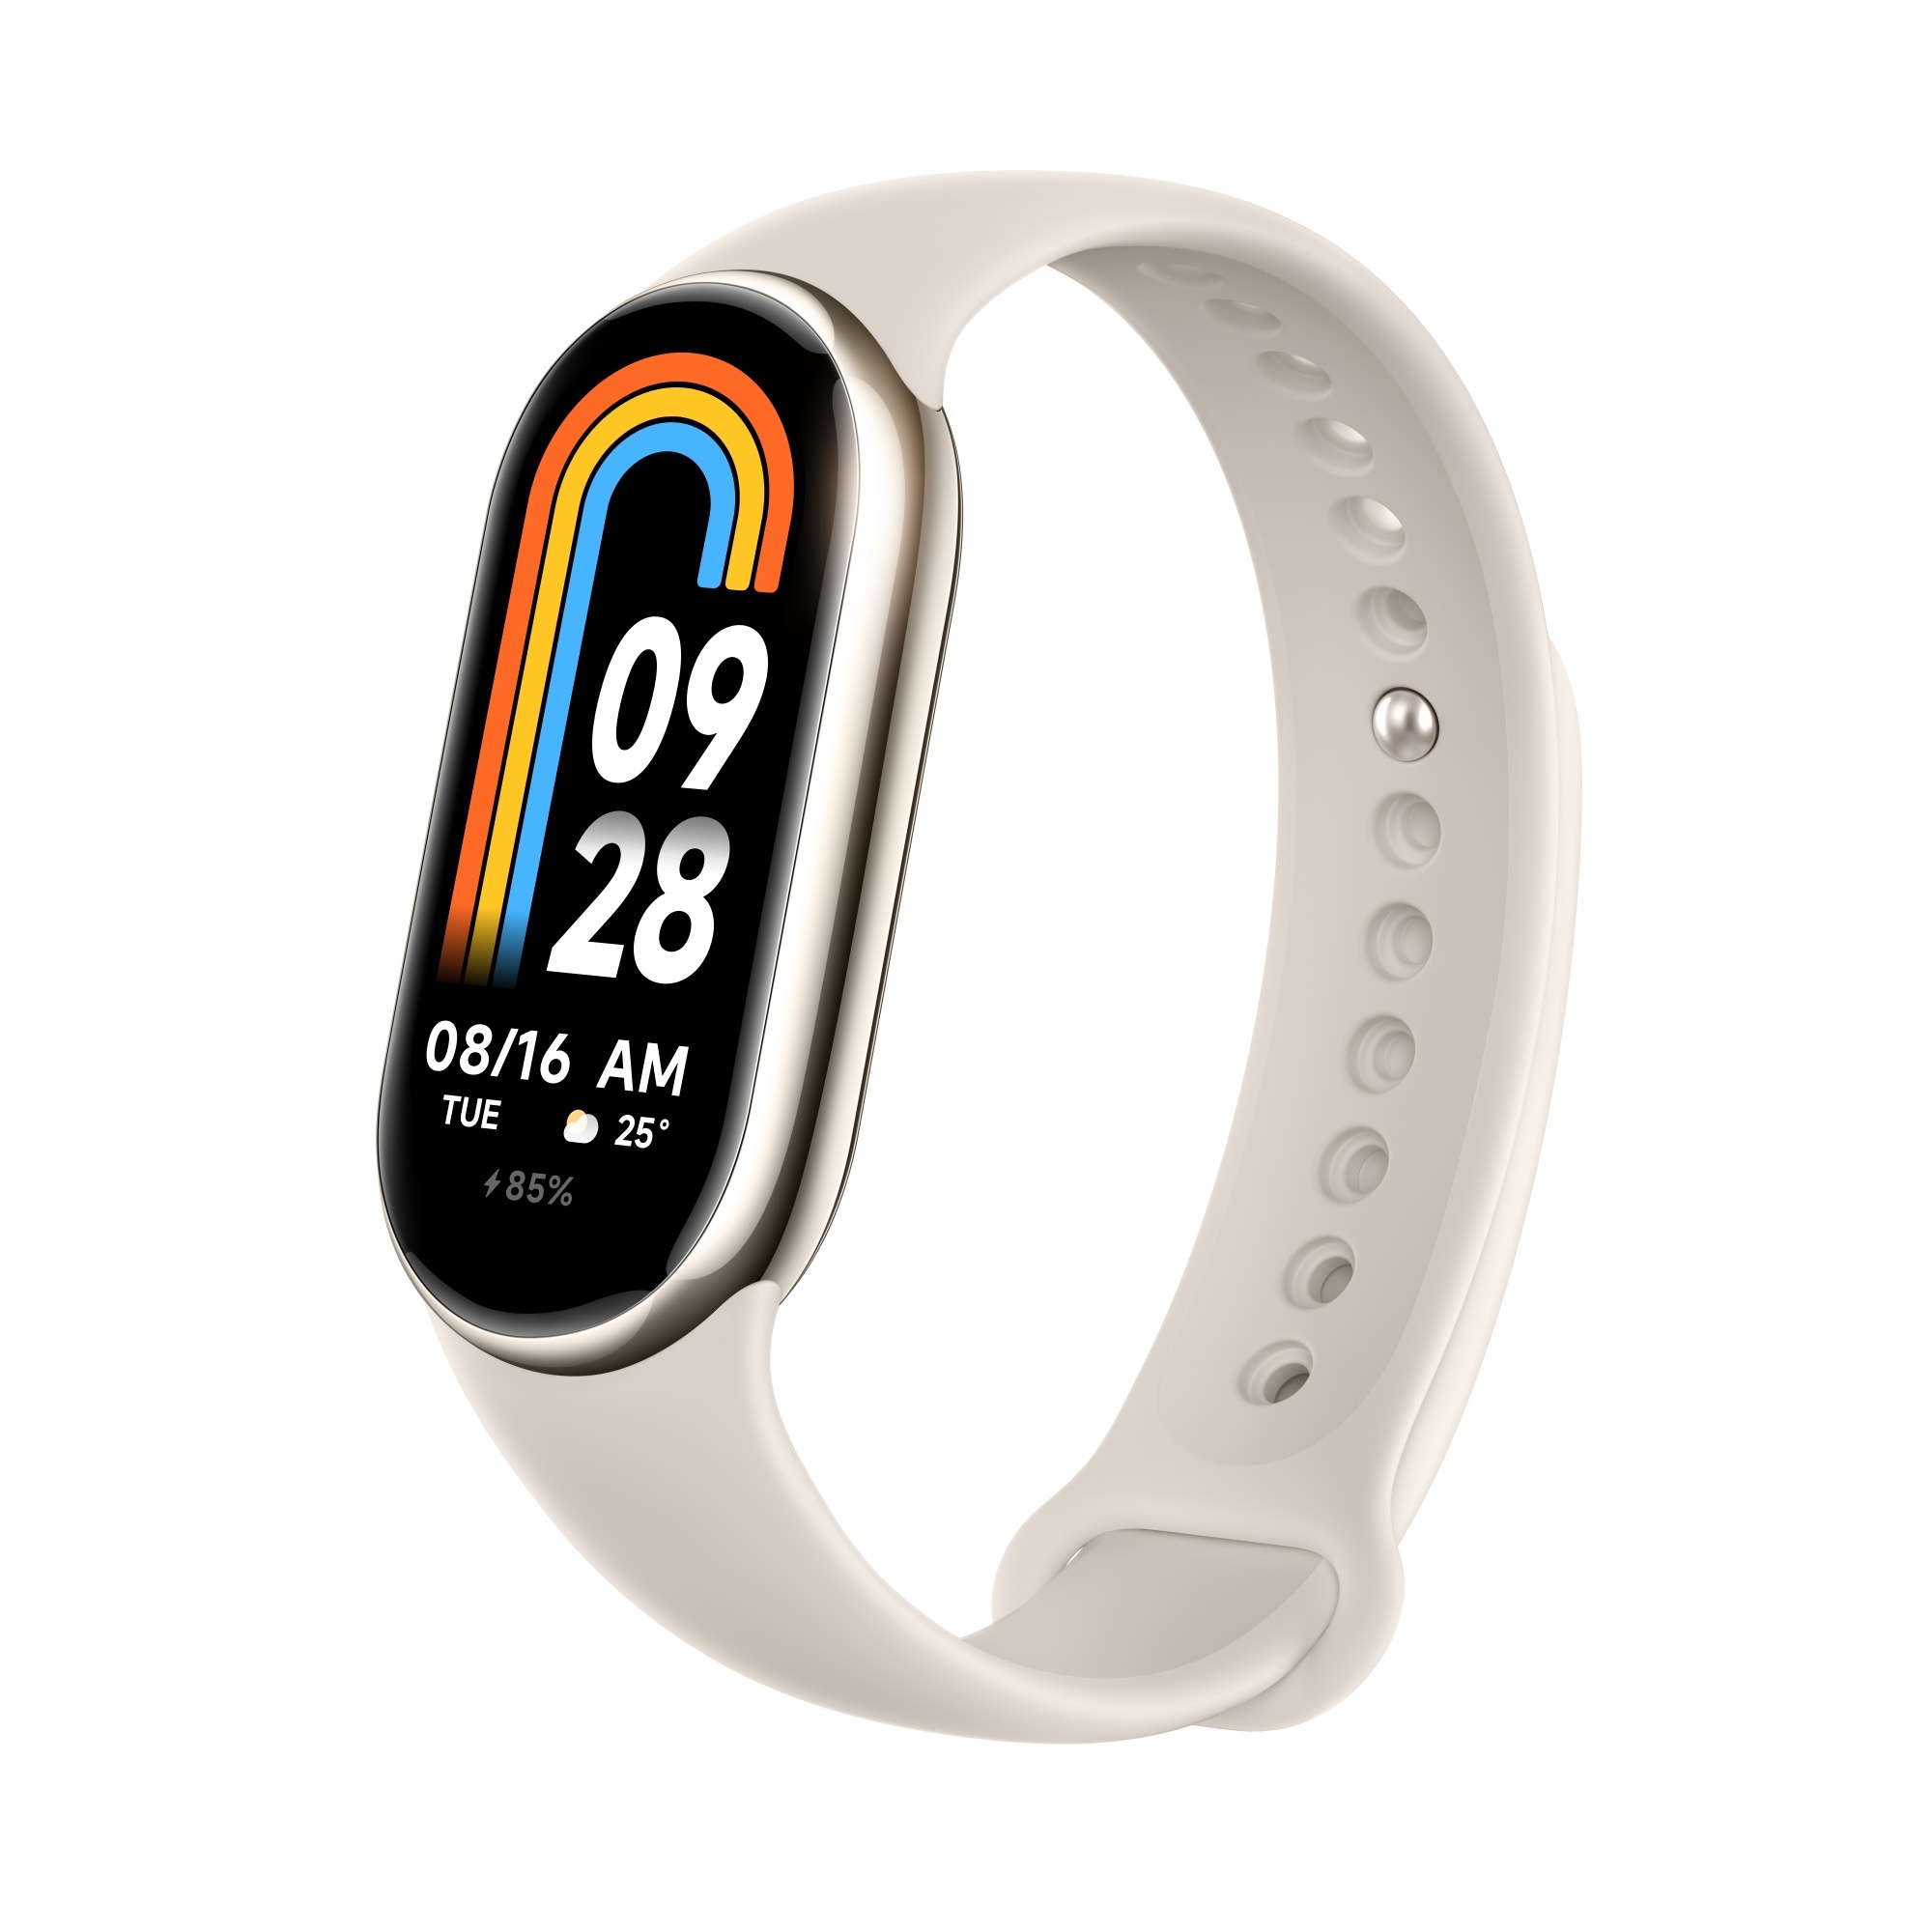 The Xiaomi Mi Smart Band 6 NFC is now orderable in Europe for